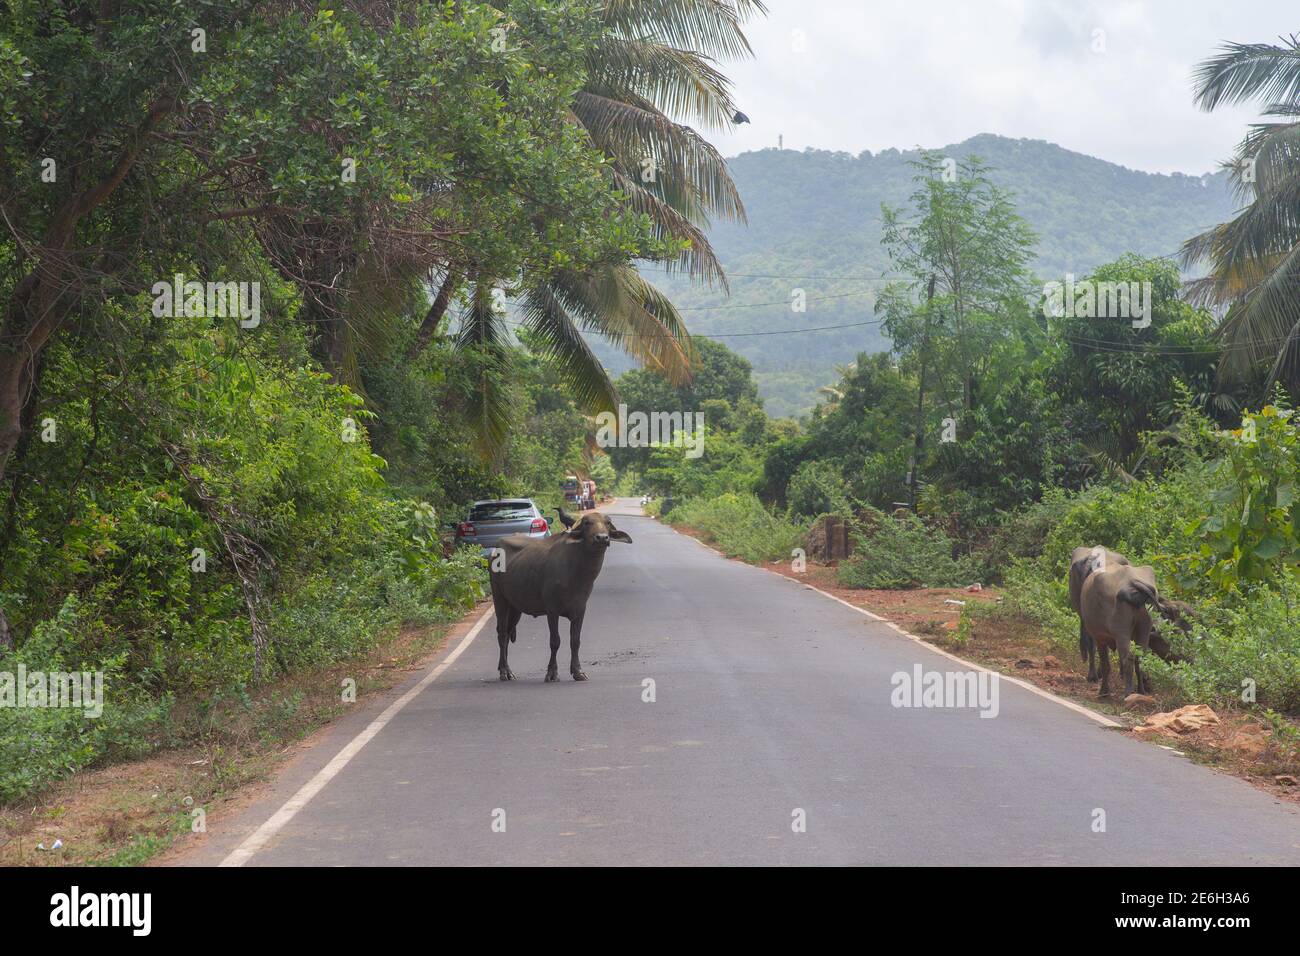 A buffalo in the middle of the road in south India Stock Photo